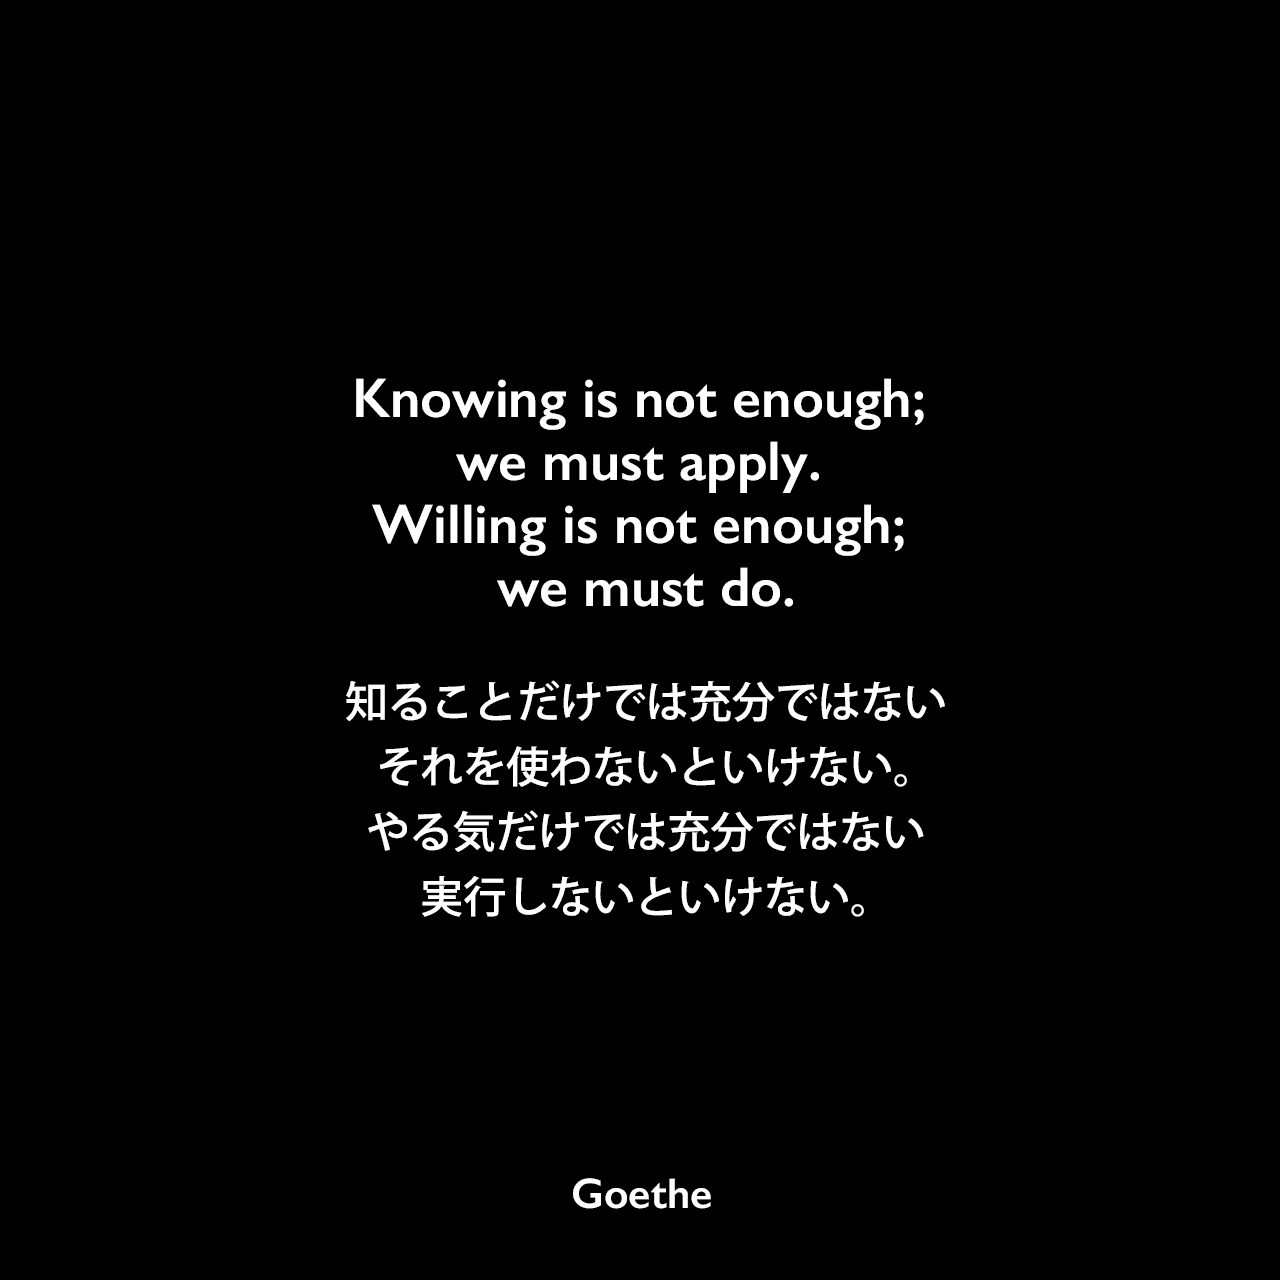 Knowing is not enough; we must apply. Willing is not enough; we must do.知ることだけでは充分ではない、それを使わないといけない。やる気だけでは充分ではない、実行しないといけない。Johann Wolfgang von Goethe